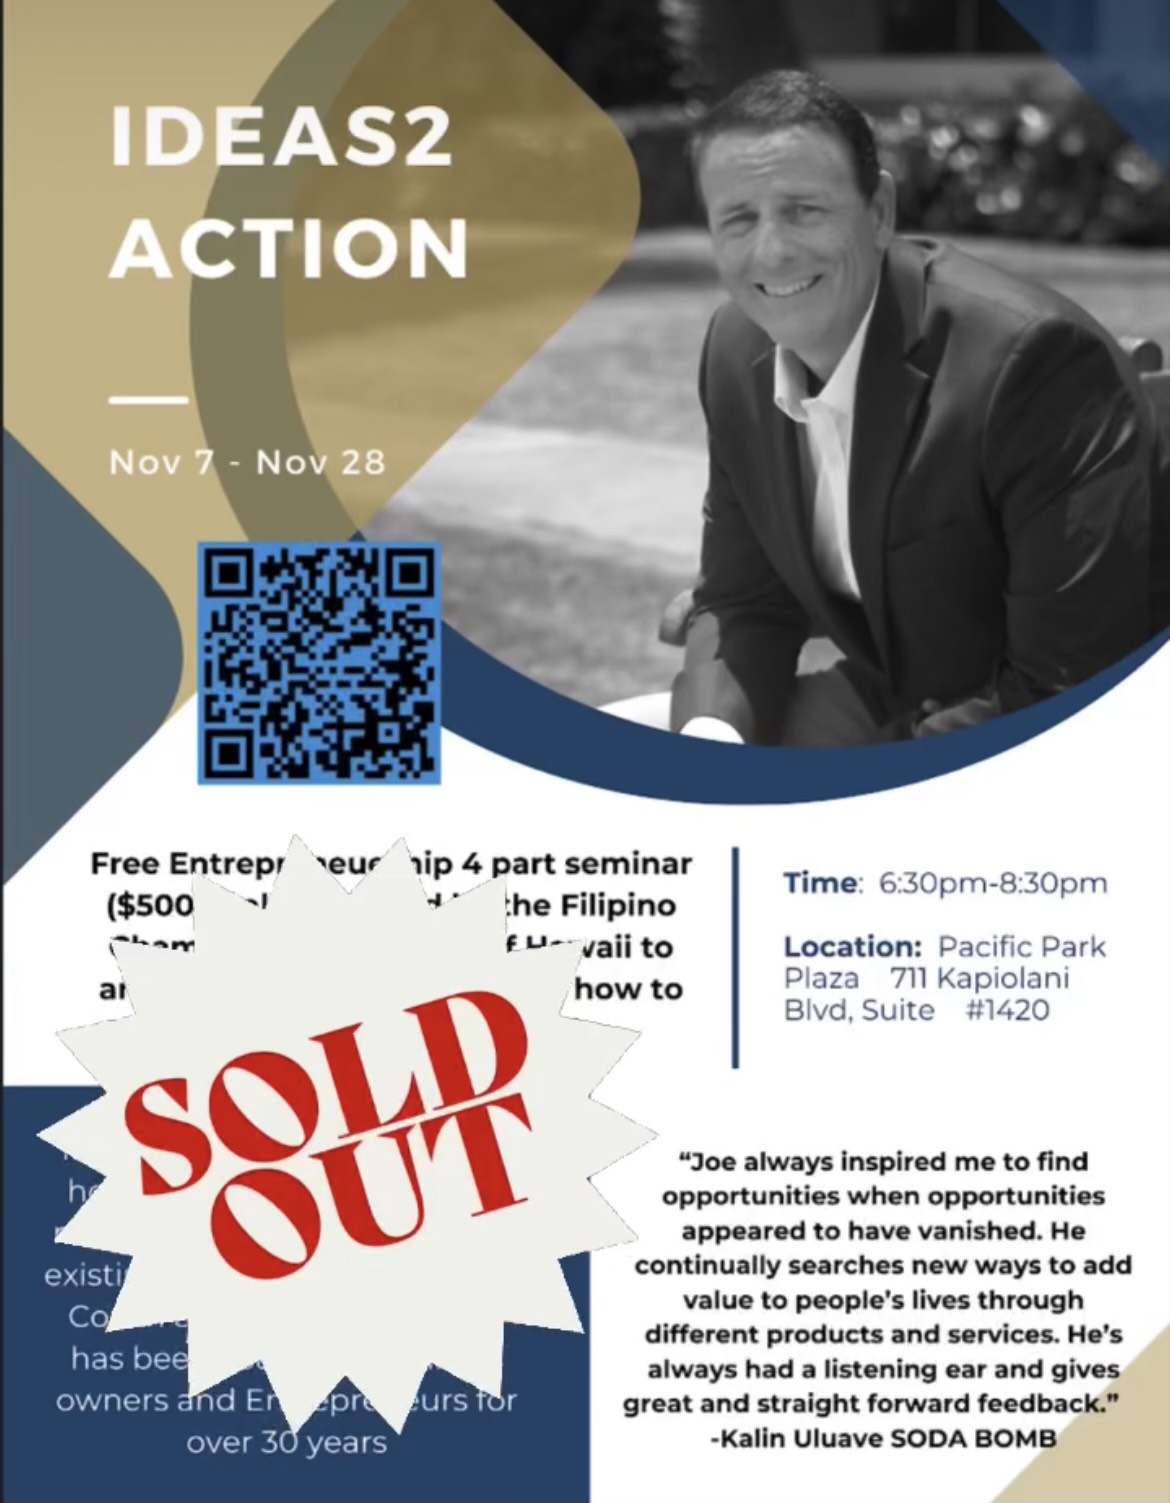 Ideas2Action - Sold Out!